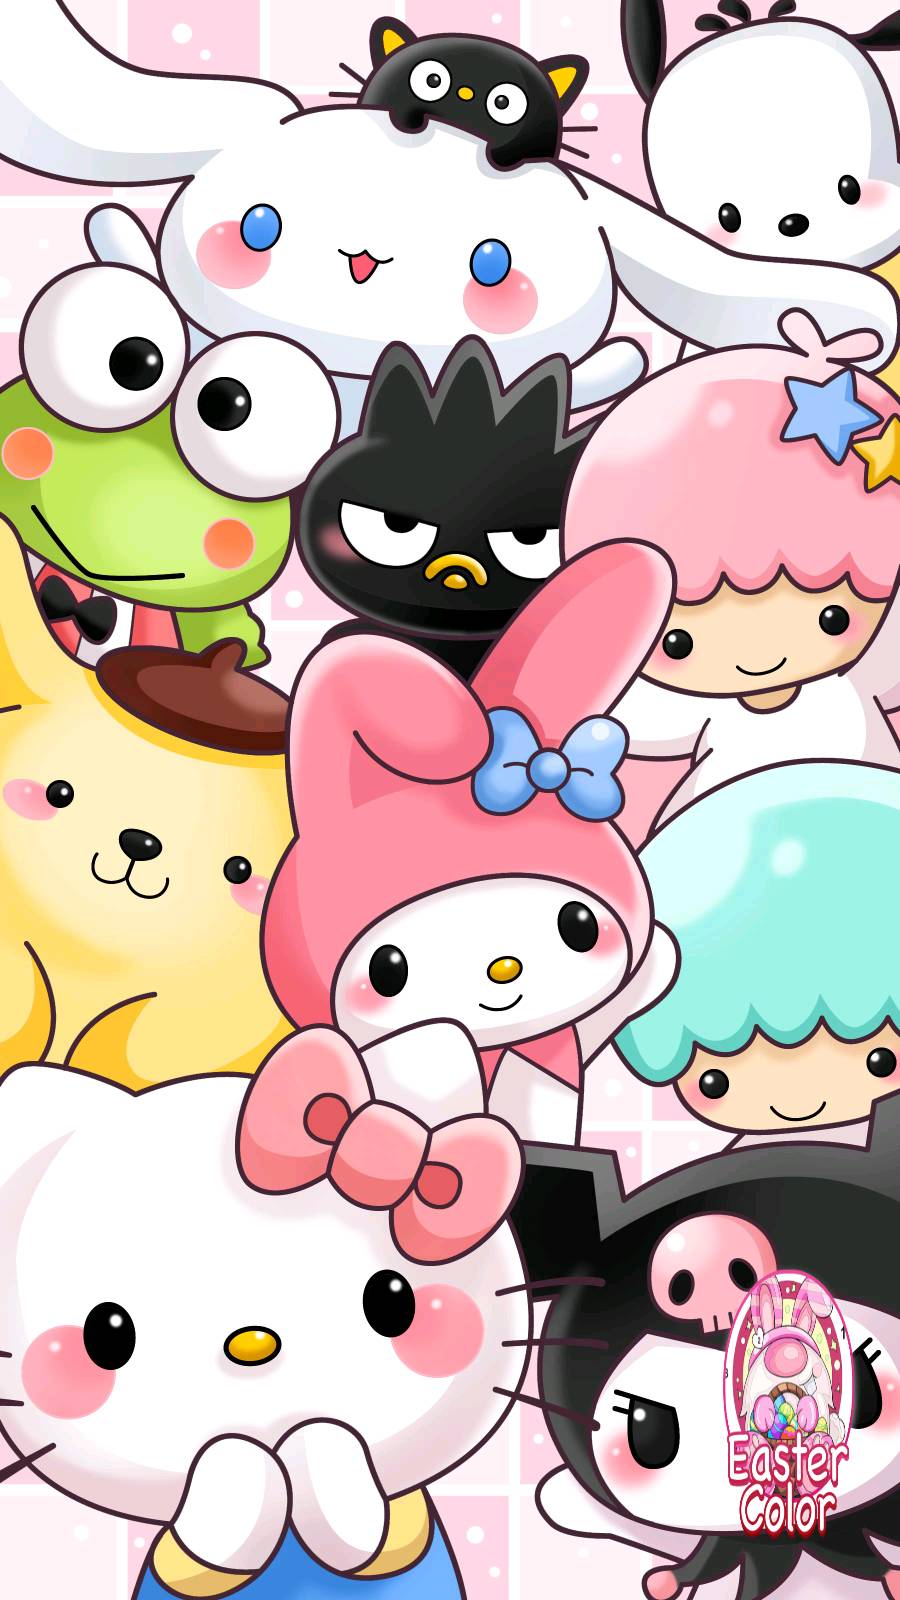 Hello Kitty and her co friends by drawingliker100 on DeviantArt